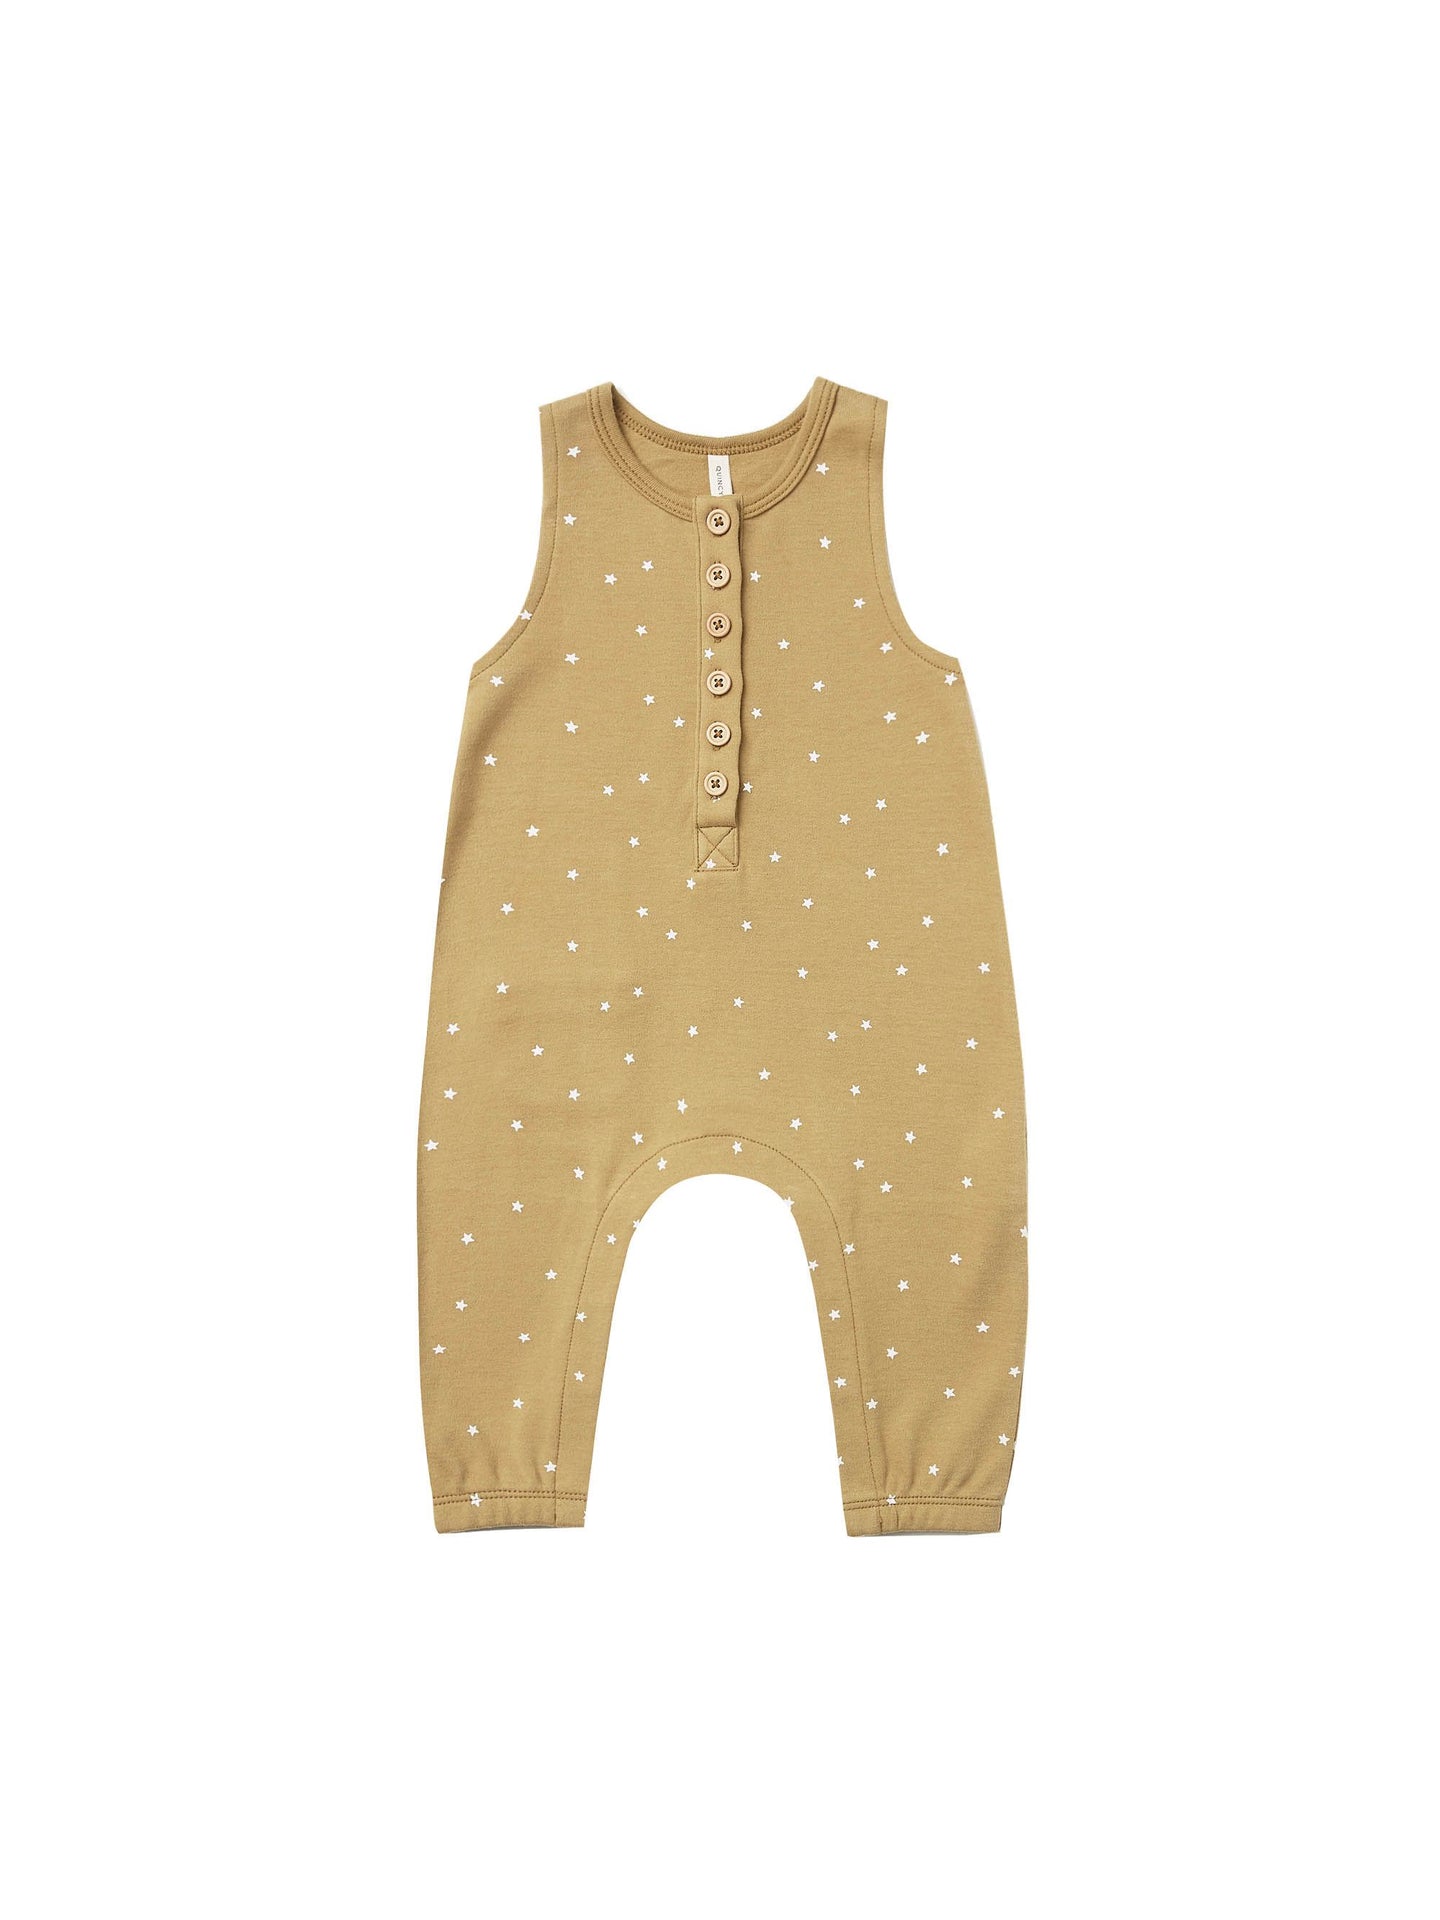 Quincy Mae - Sleeveless Jumpsuit - Gold Stripe